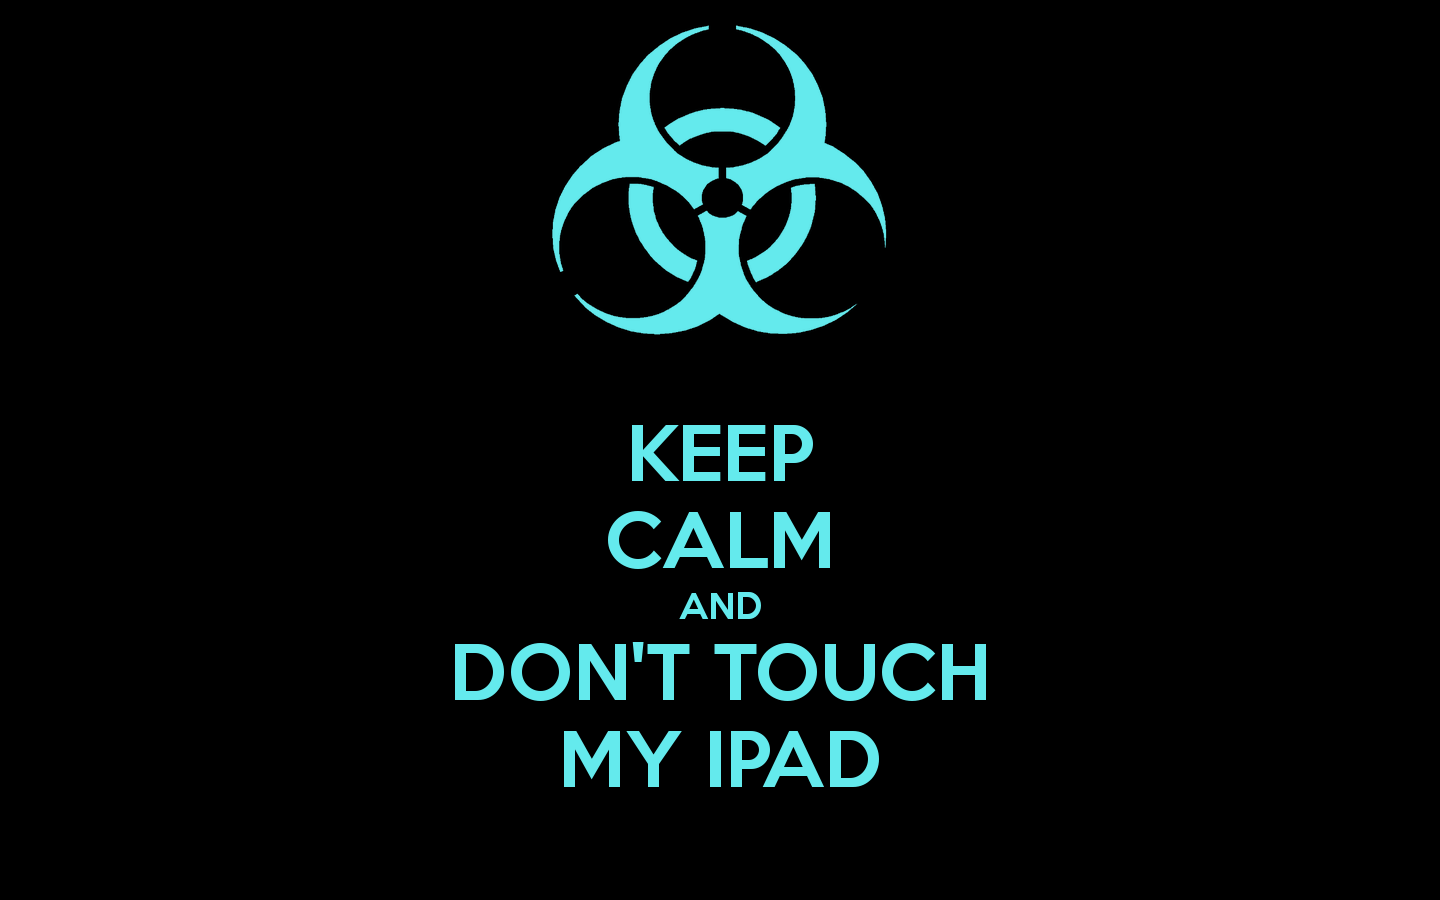 Don t touch 2. Обои don't Touch. Don't Touch my Phone обои. Обои don't Touch my IPAD. Фото don't Touch my Phone.